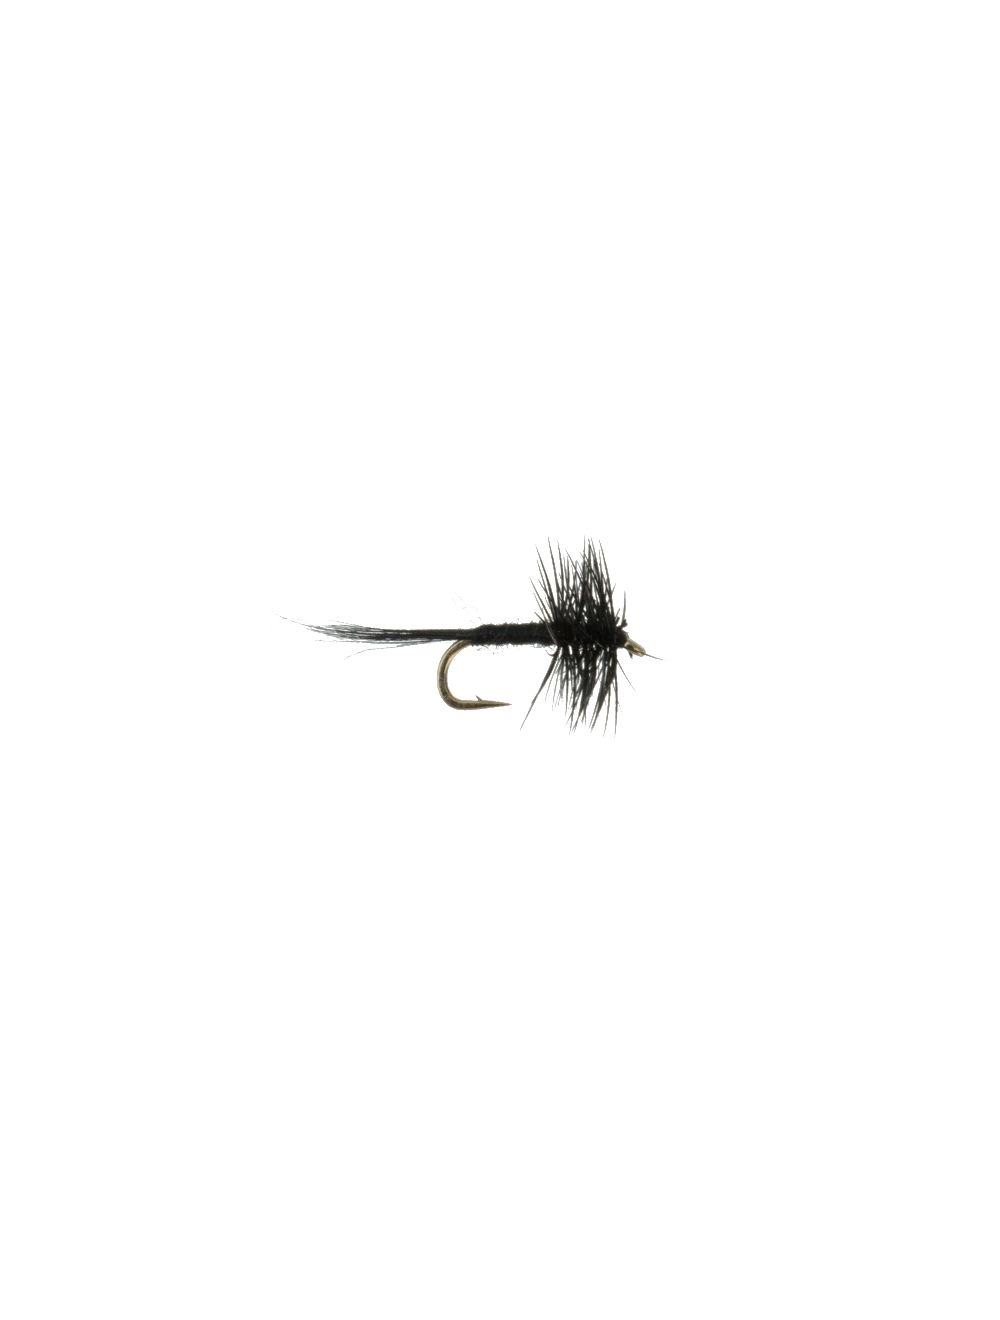 How to Fly Fish with Midge Patterns - Guide Recommended